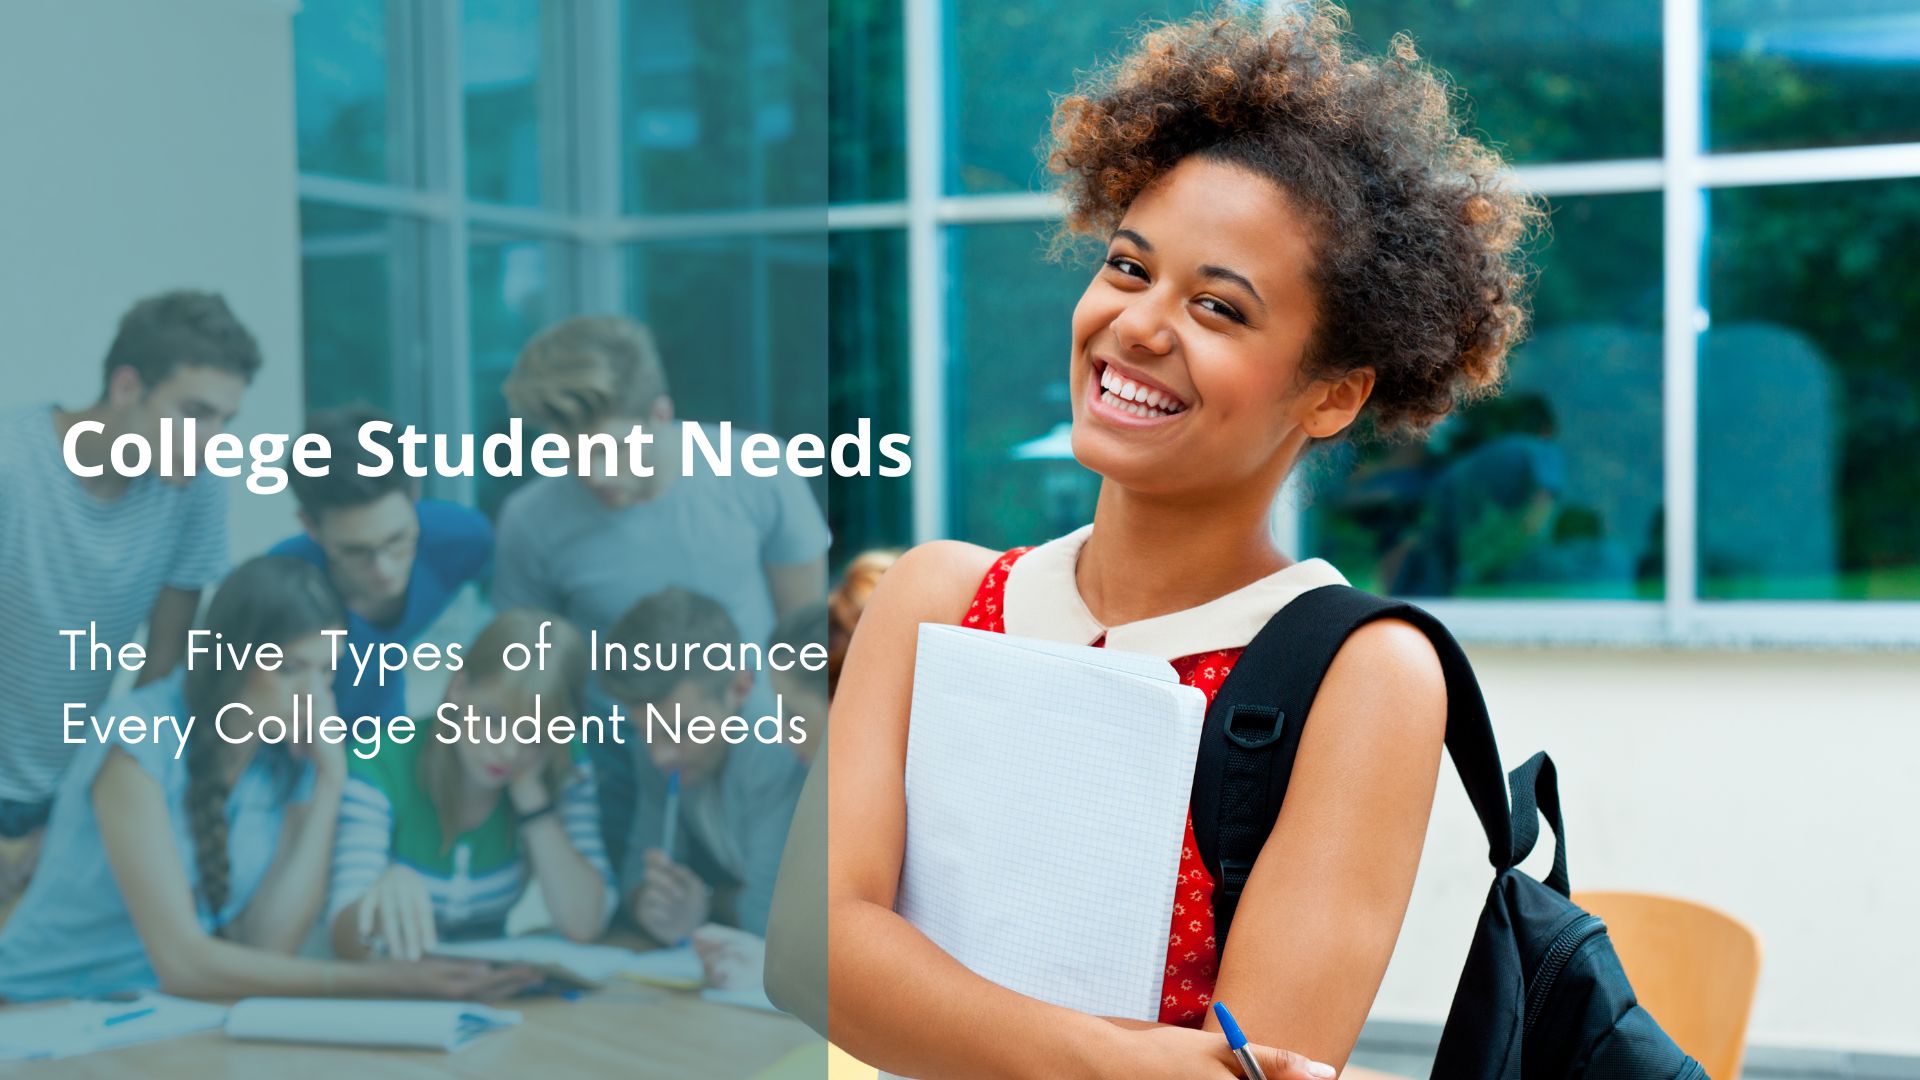 The Five Types of Insurance Every College Student Needs